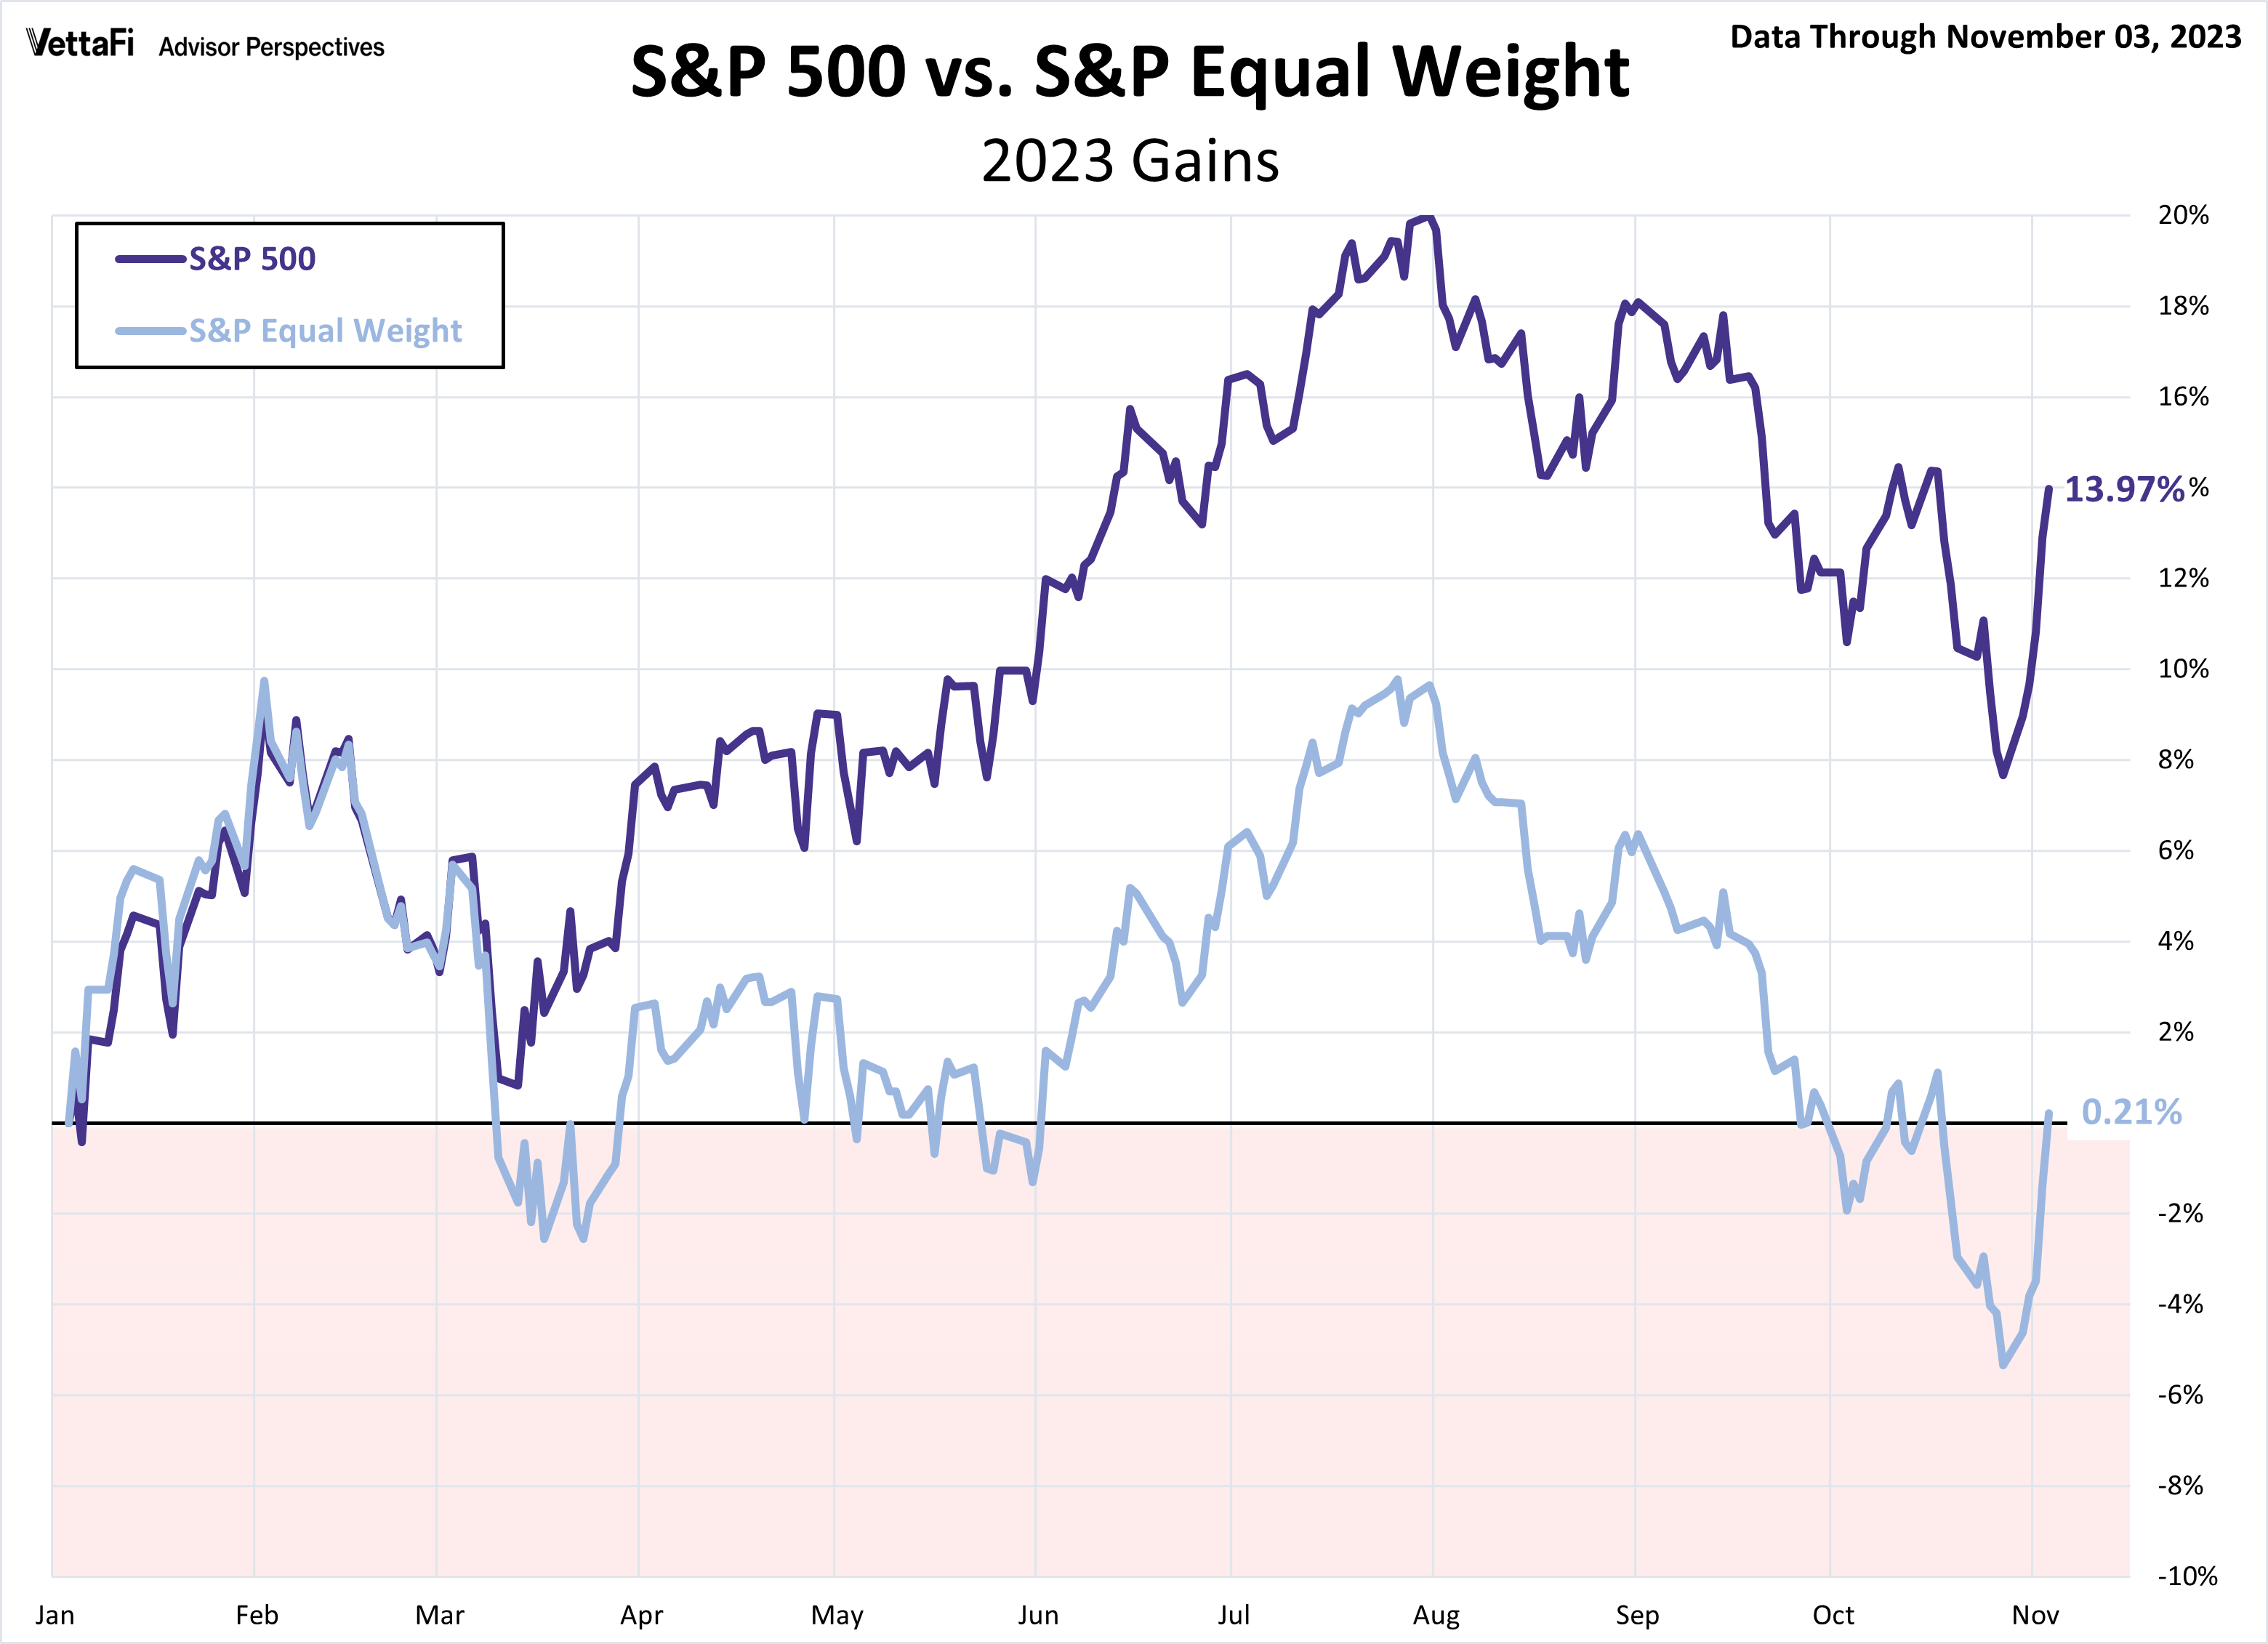 S&P 500 vs S&P Equal Weight